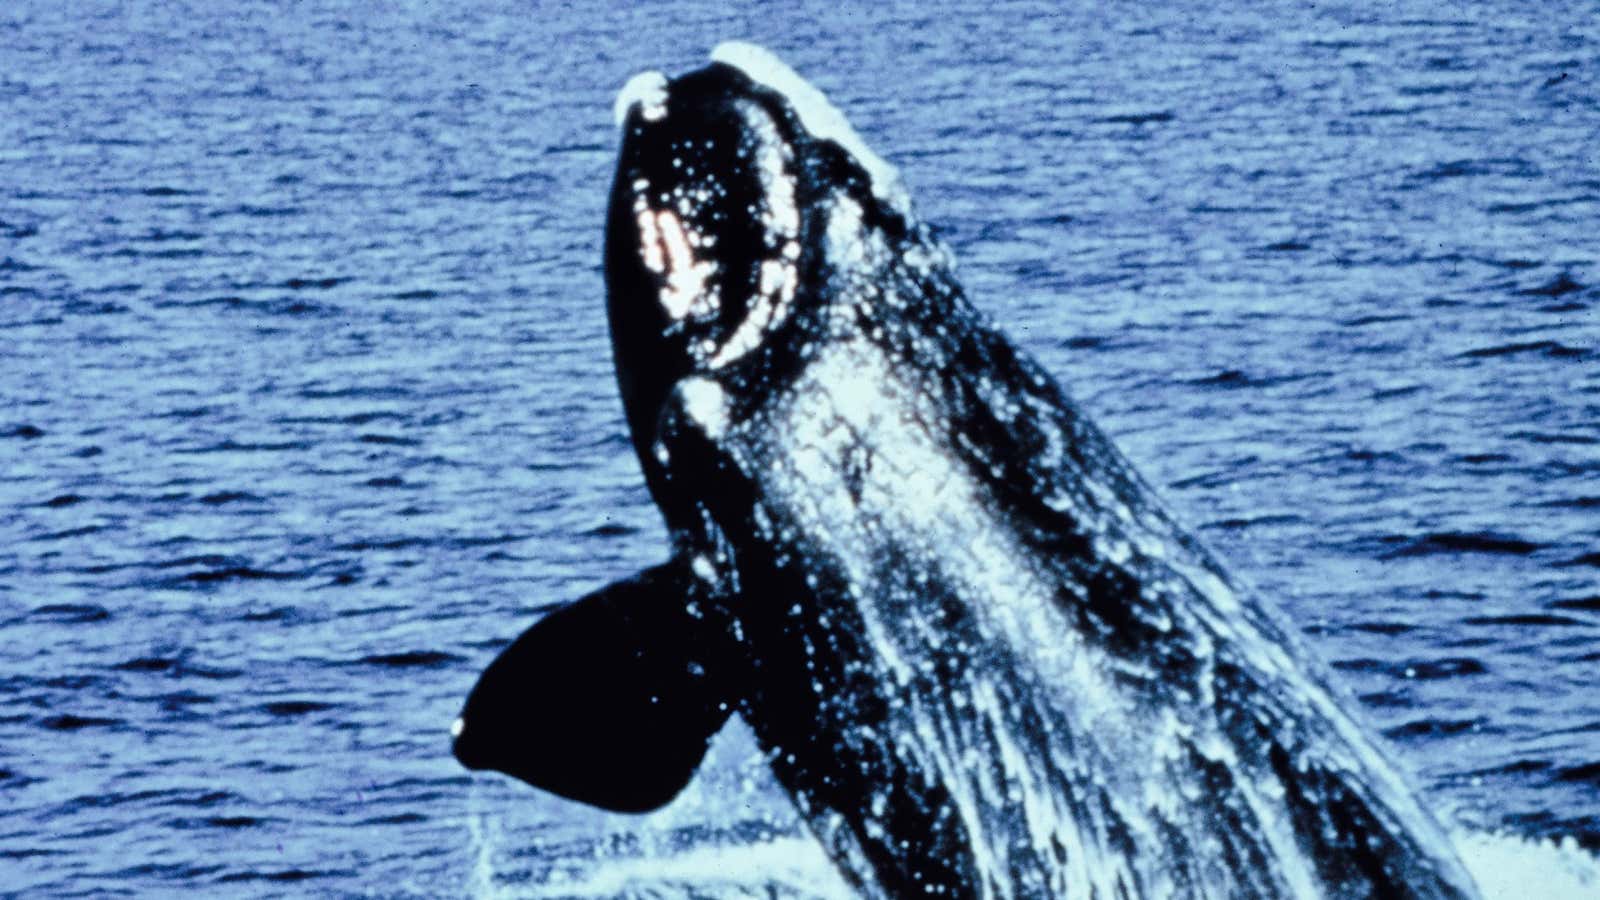 The right whale is swimming towards extinction but we could help save it.